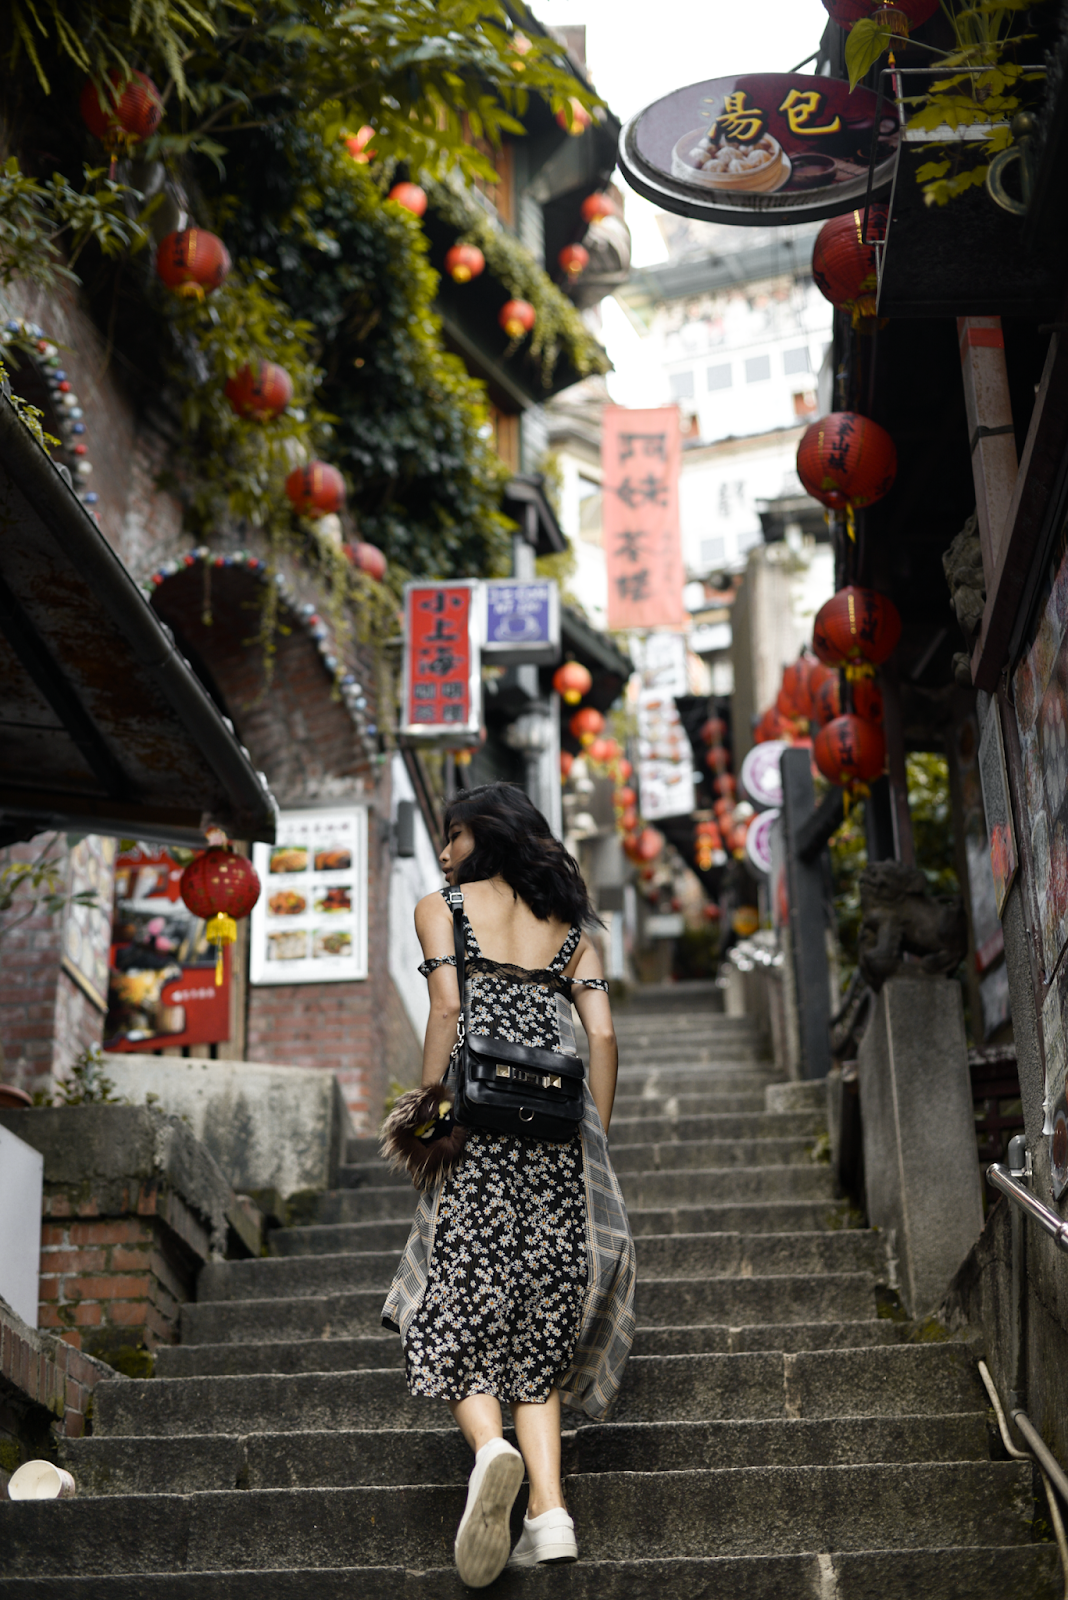 Taipei Travels, Jiufen, Jiufen Old Street, Spirited Away In Real Life, Jiufen Photos, Photos that will make you want to visit Jiufen right away, Taiwan's Jiufen, / Jiufen, Taiwan / A Real Life Spirited Away / FOREVERVANNY